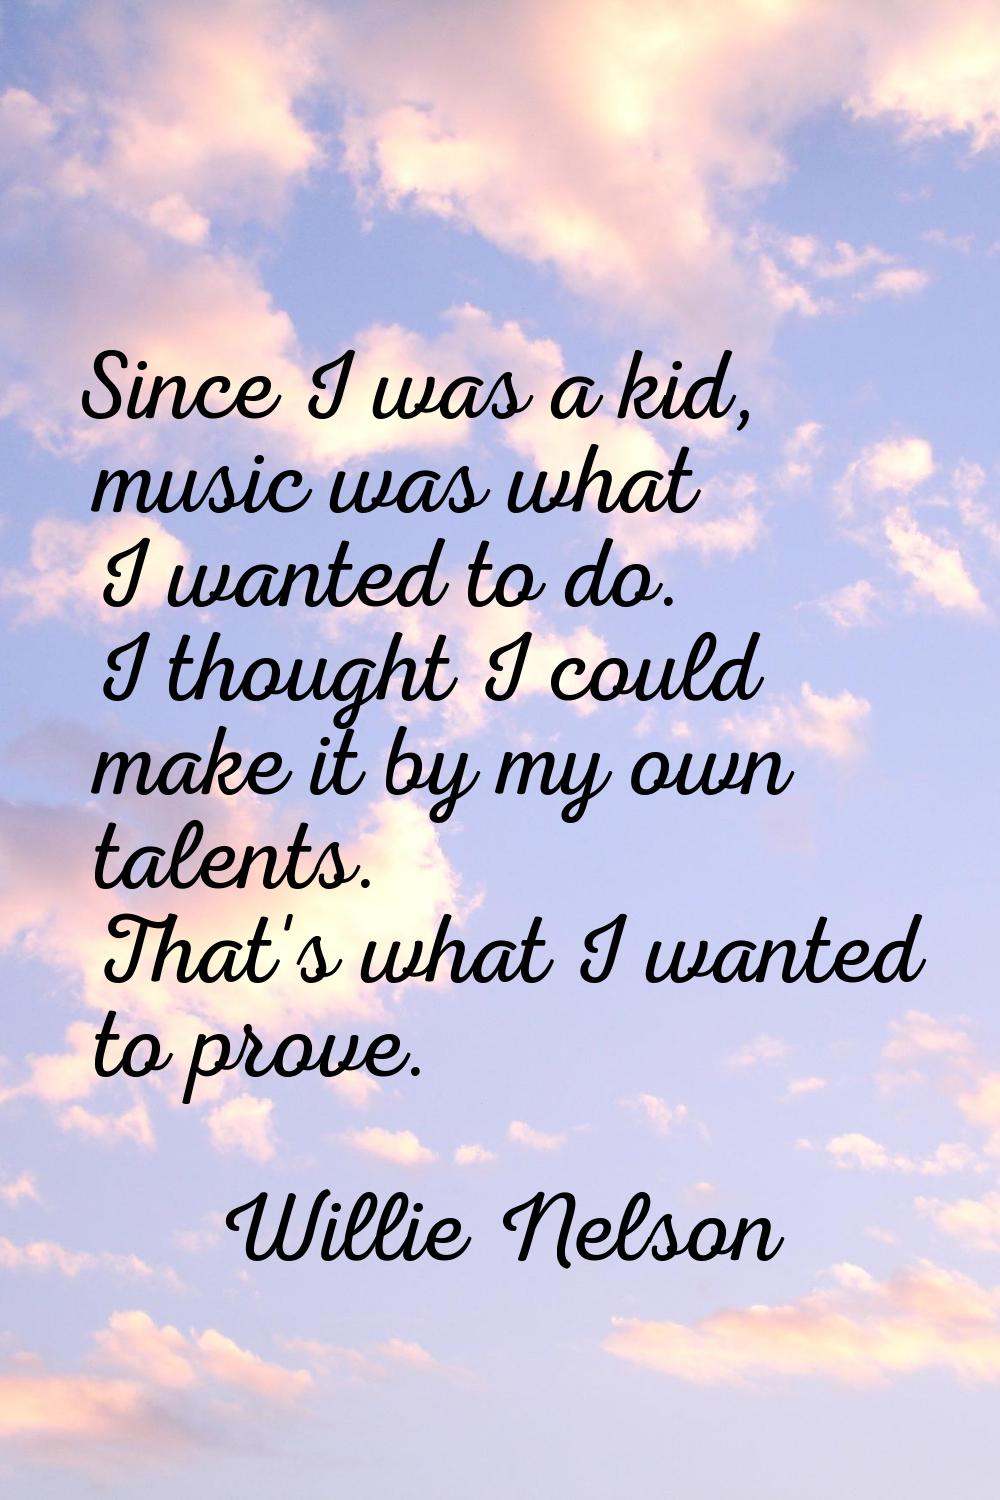 Since I was a kid, music was what I wanted to do. I thought I could make it by my own talents. That